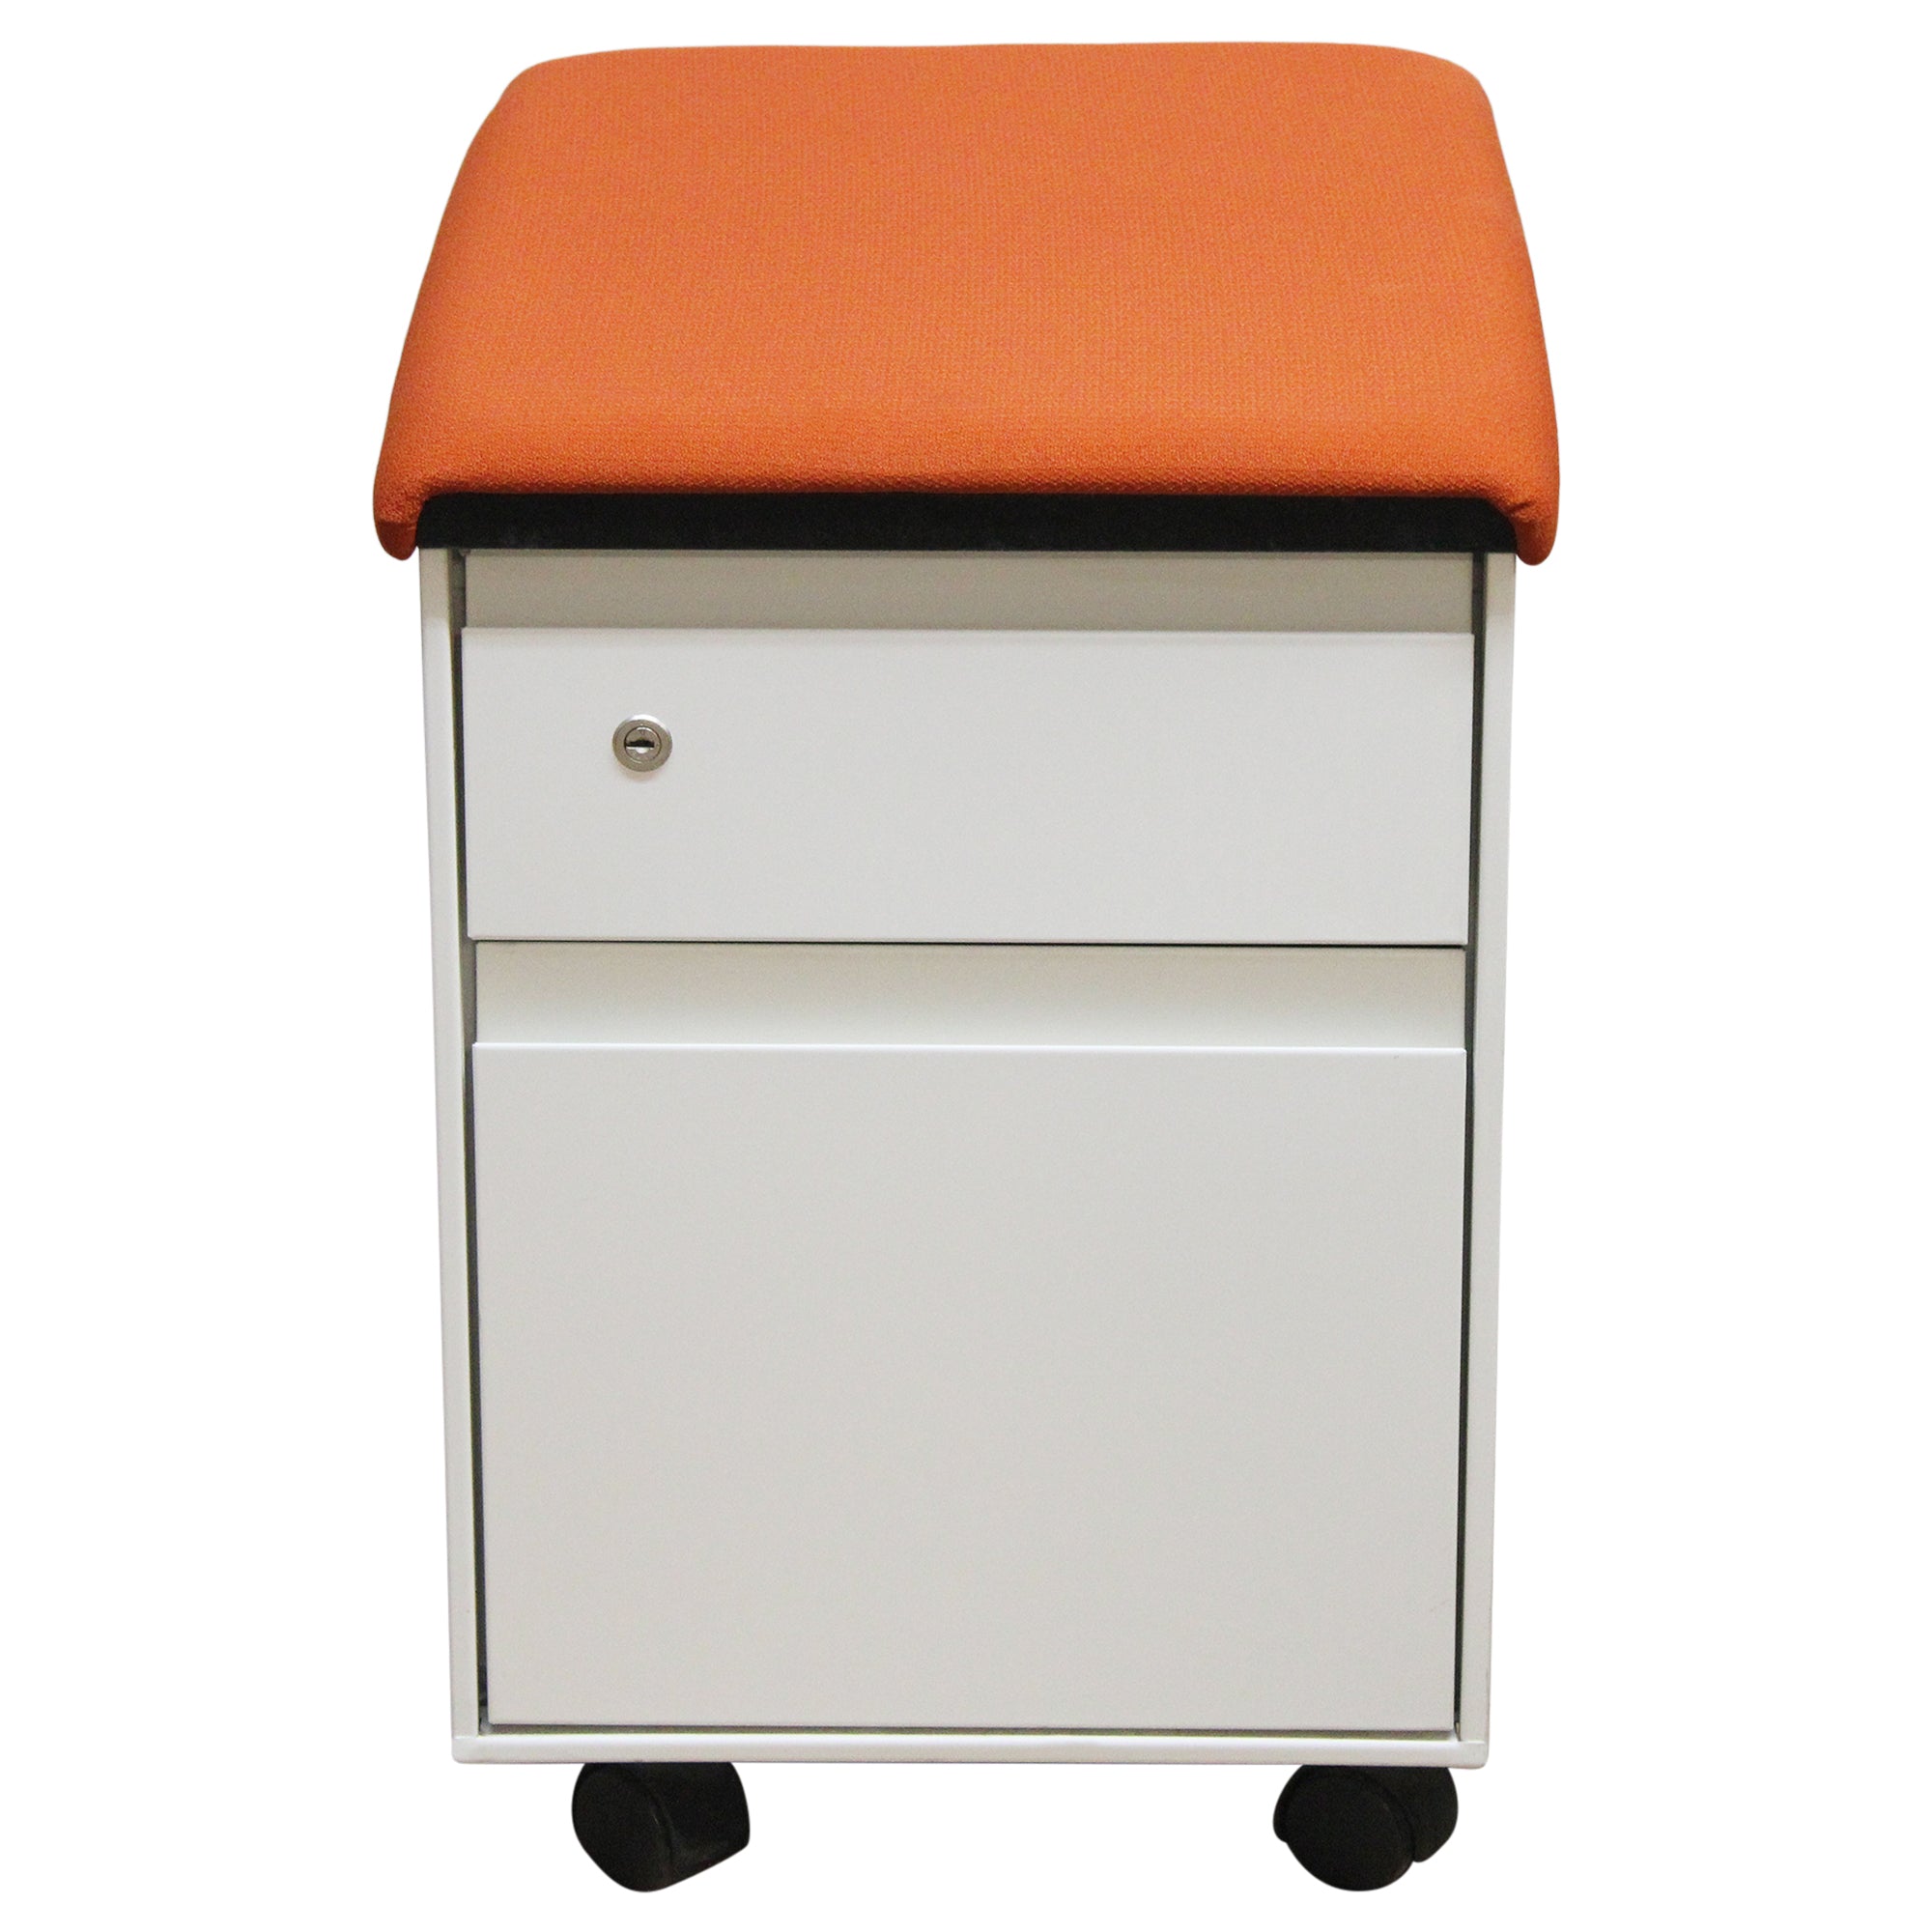 Steelcase 2-Drawer Mobile Pedestal with Cushion, Orange & White - Preowned